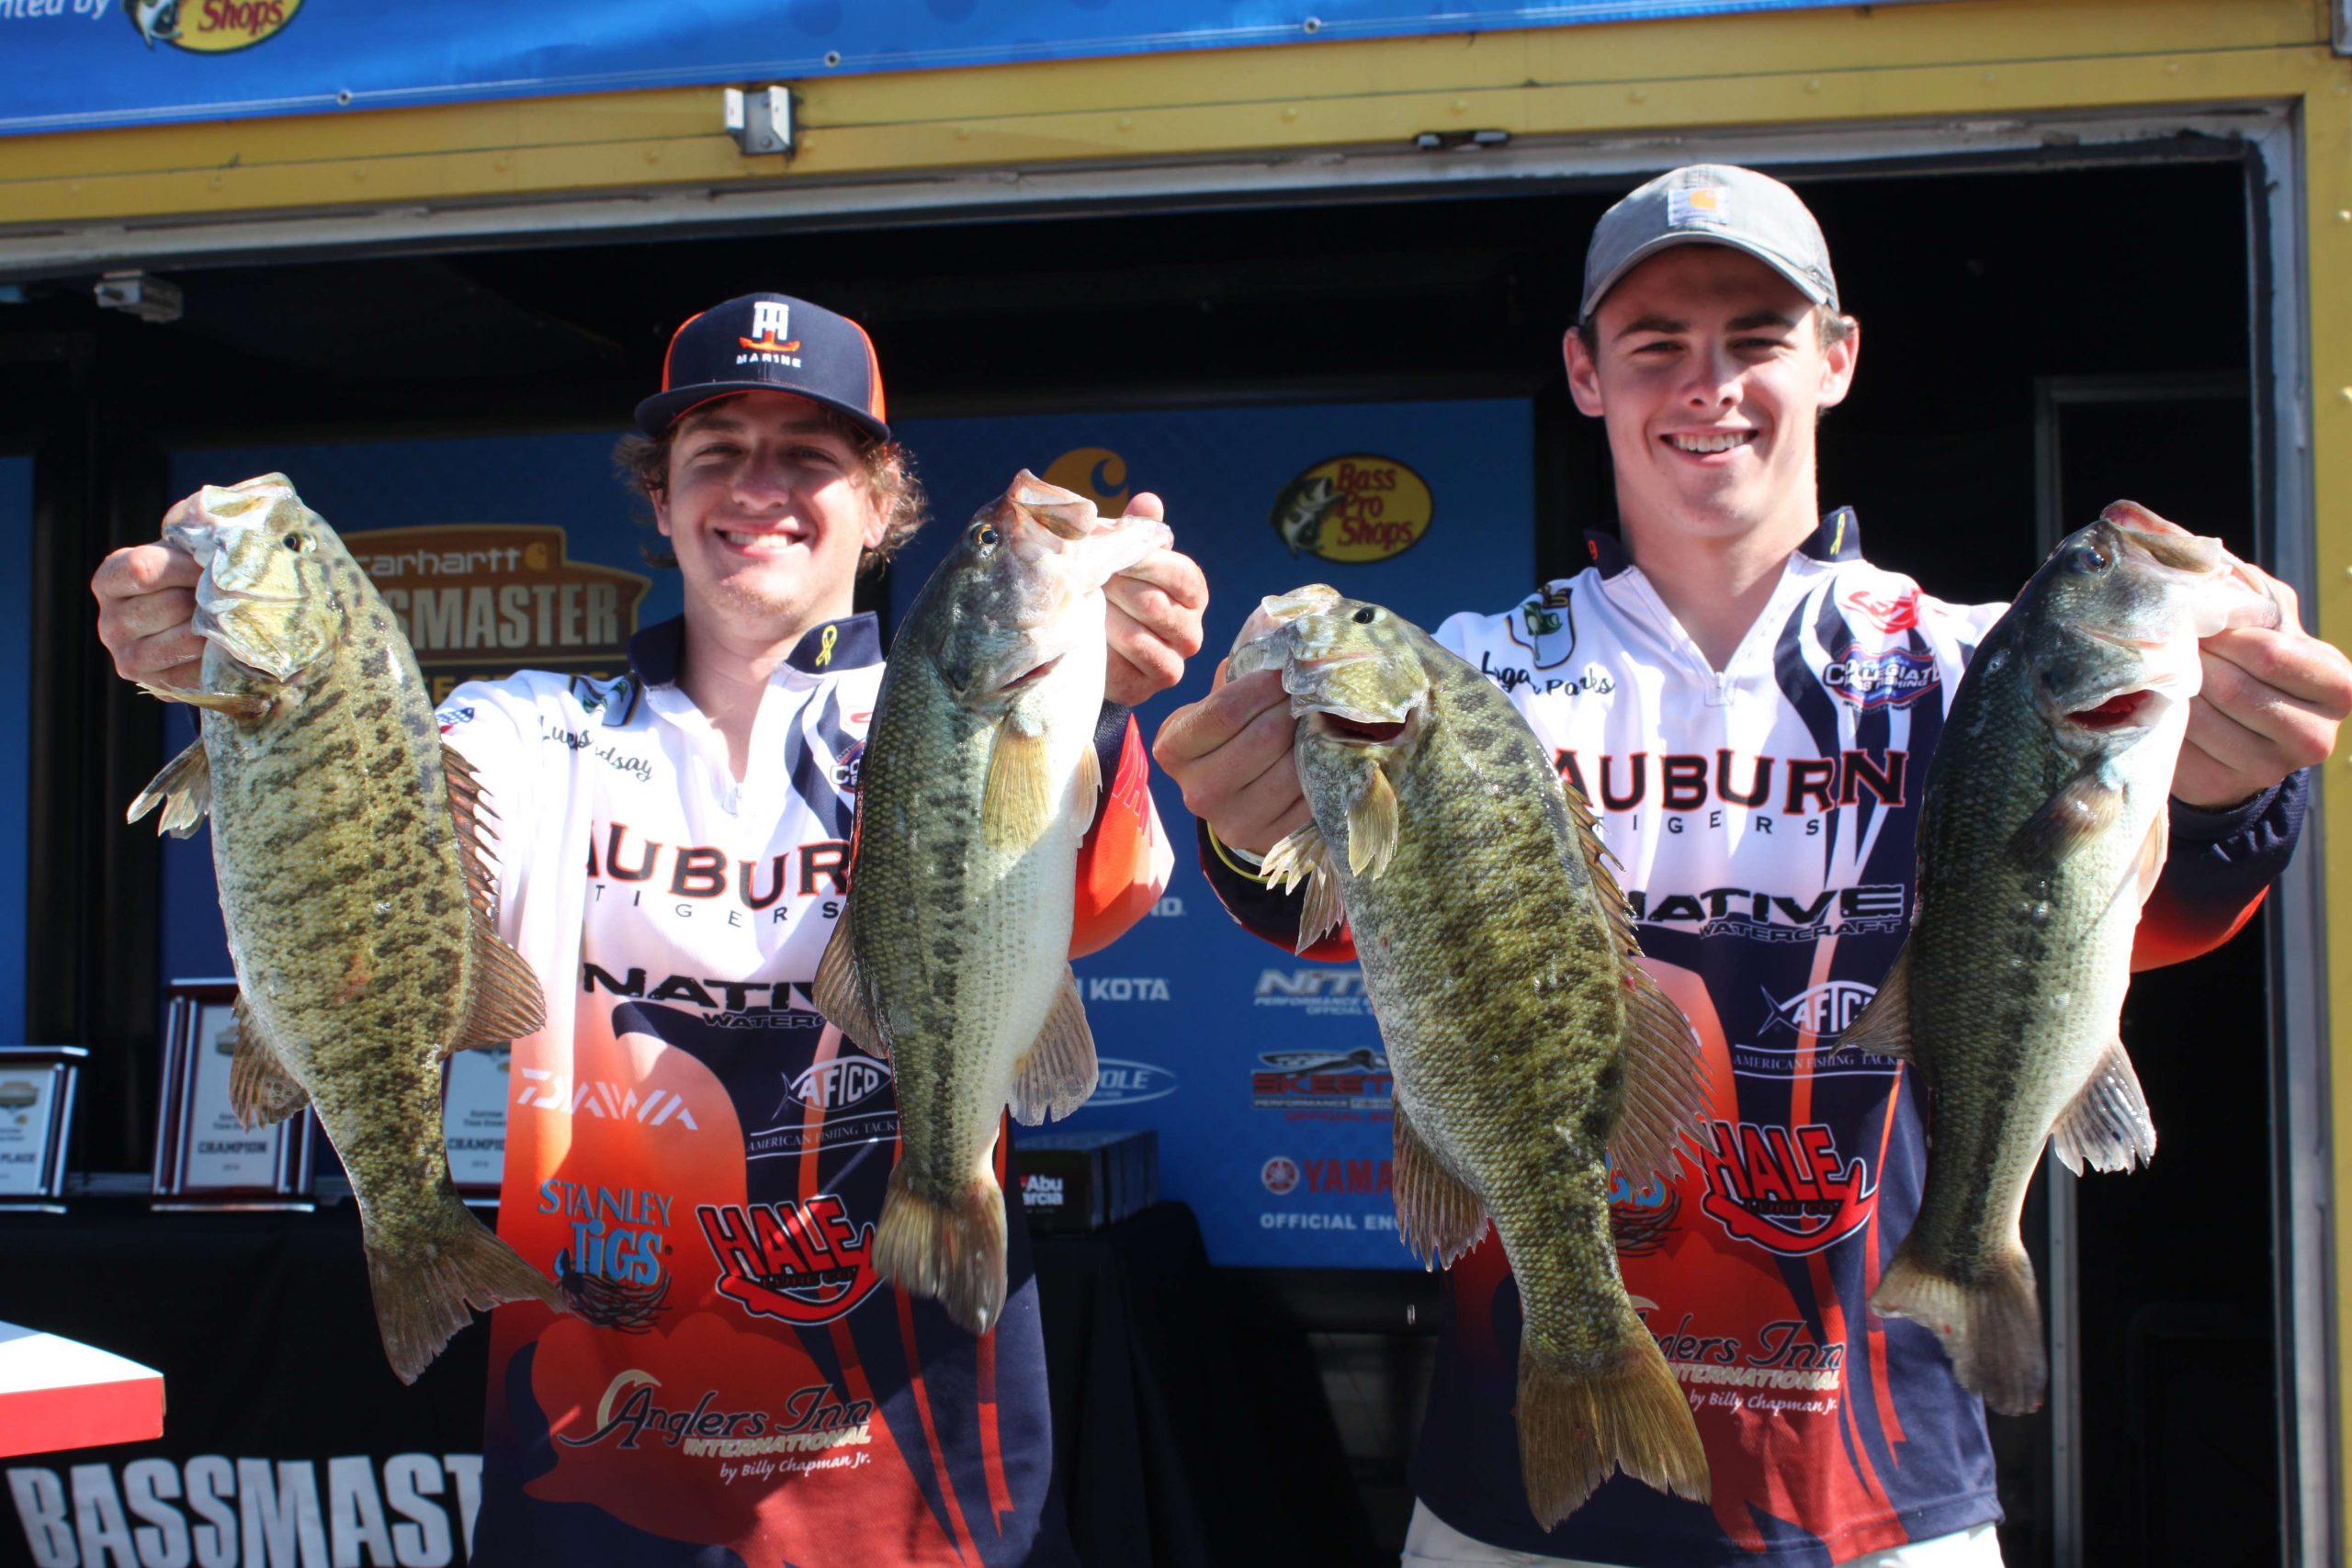 Logan Parks and Lucas Lindsay of Auburn University placed sixth with 39-15.